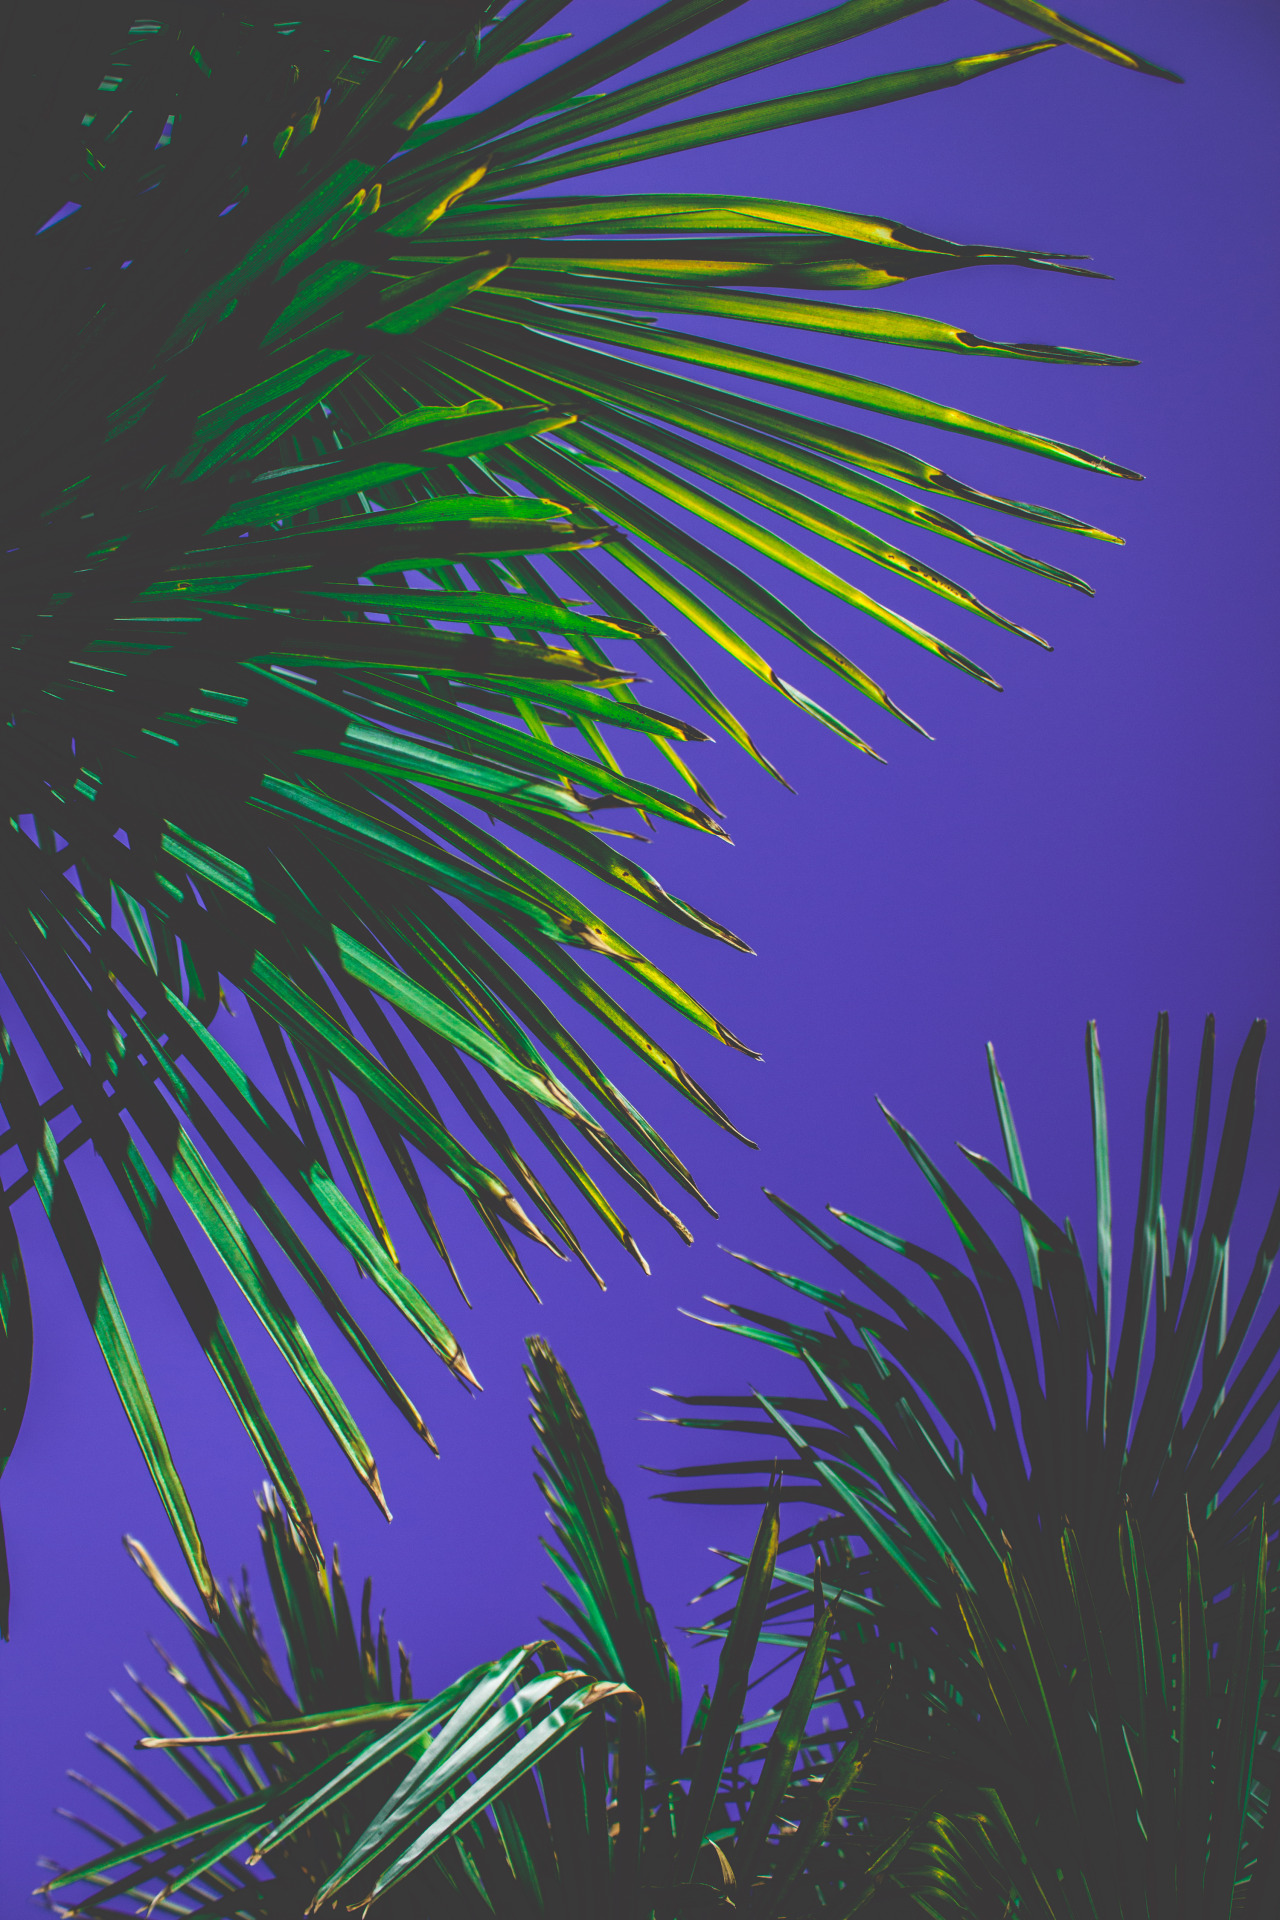 Tropical palm trees